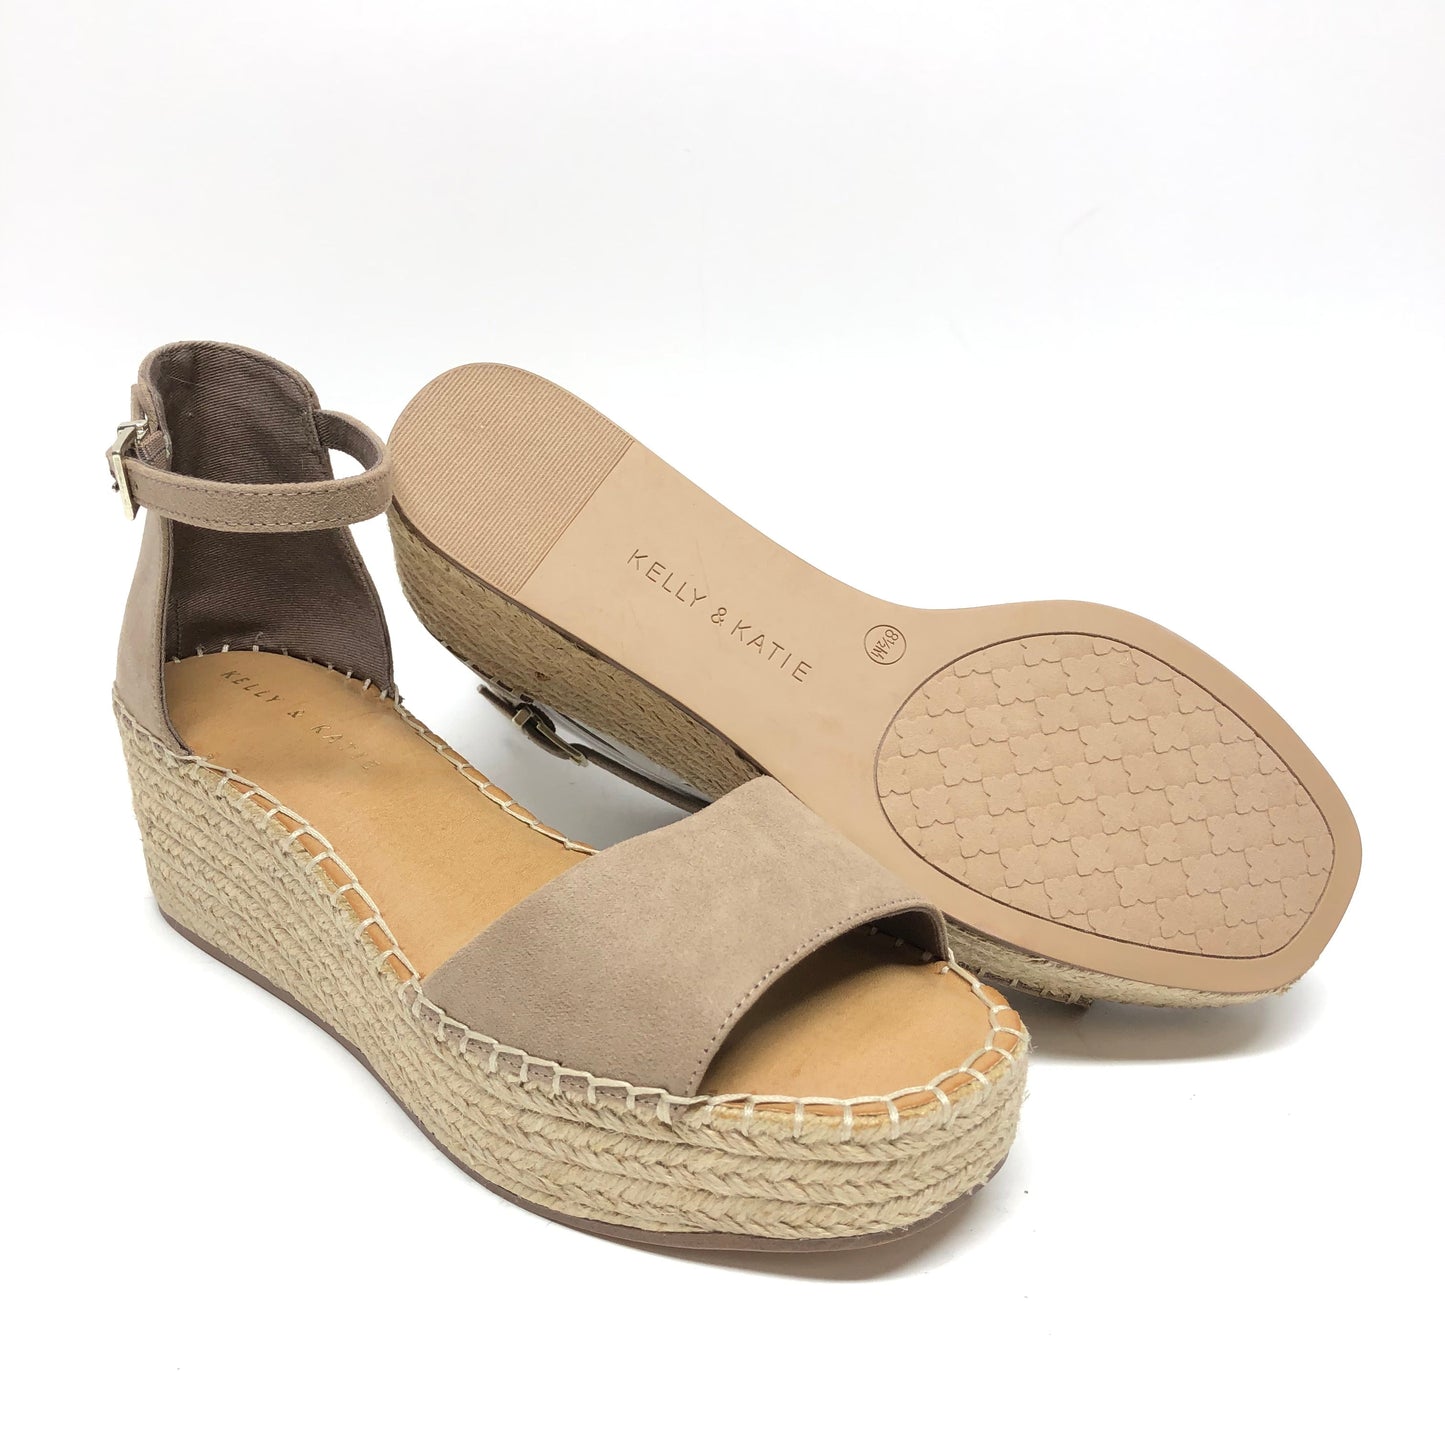 Sandals Heels Wedge By Kelly And Katie  Size: 8.5